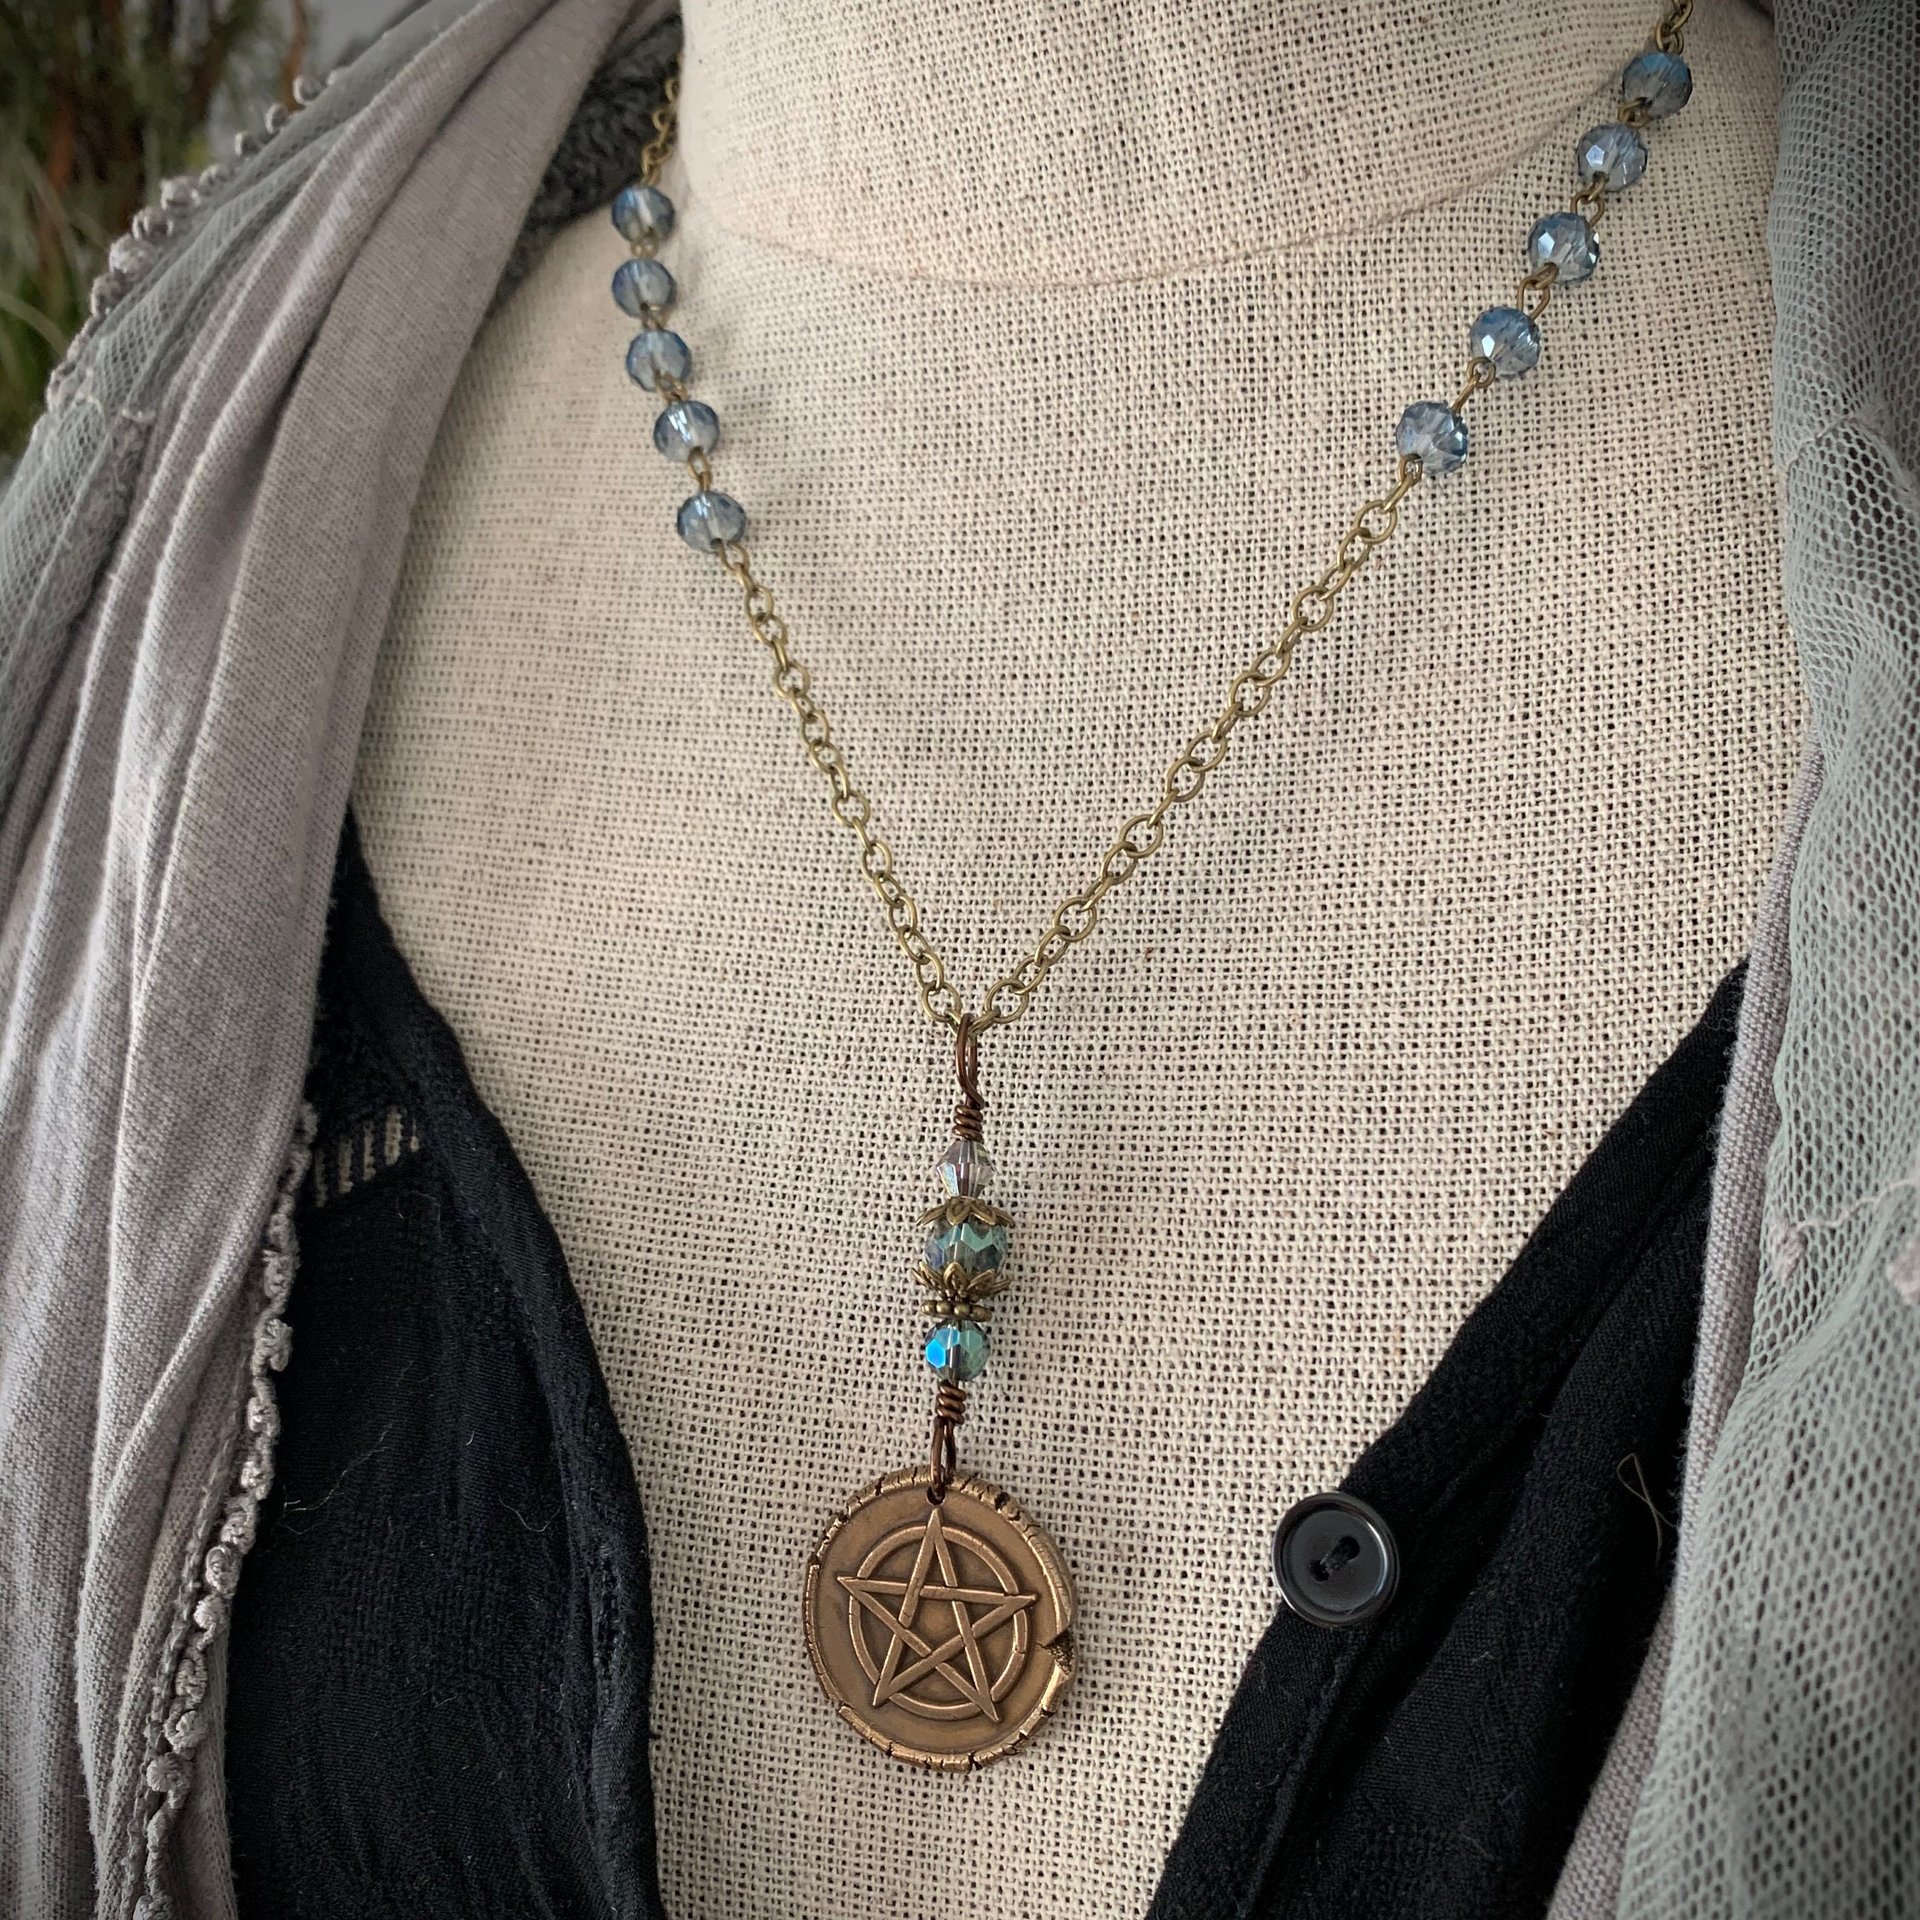 Pentagram Charm Necklace, Blue Crystal Beads, 5 Elements, Long Pentacle Necklace, Pagan Wicca, Earth Air Fire Water Spirit, Handmade Art